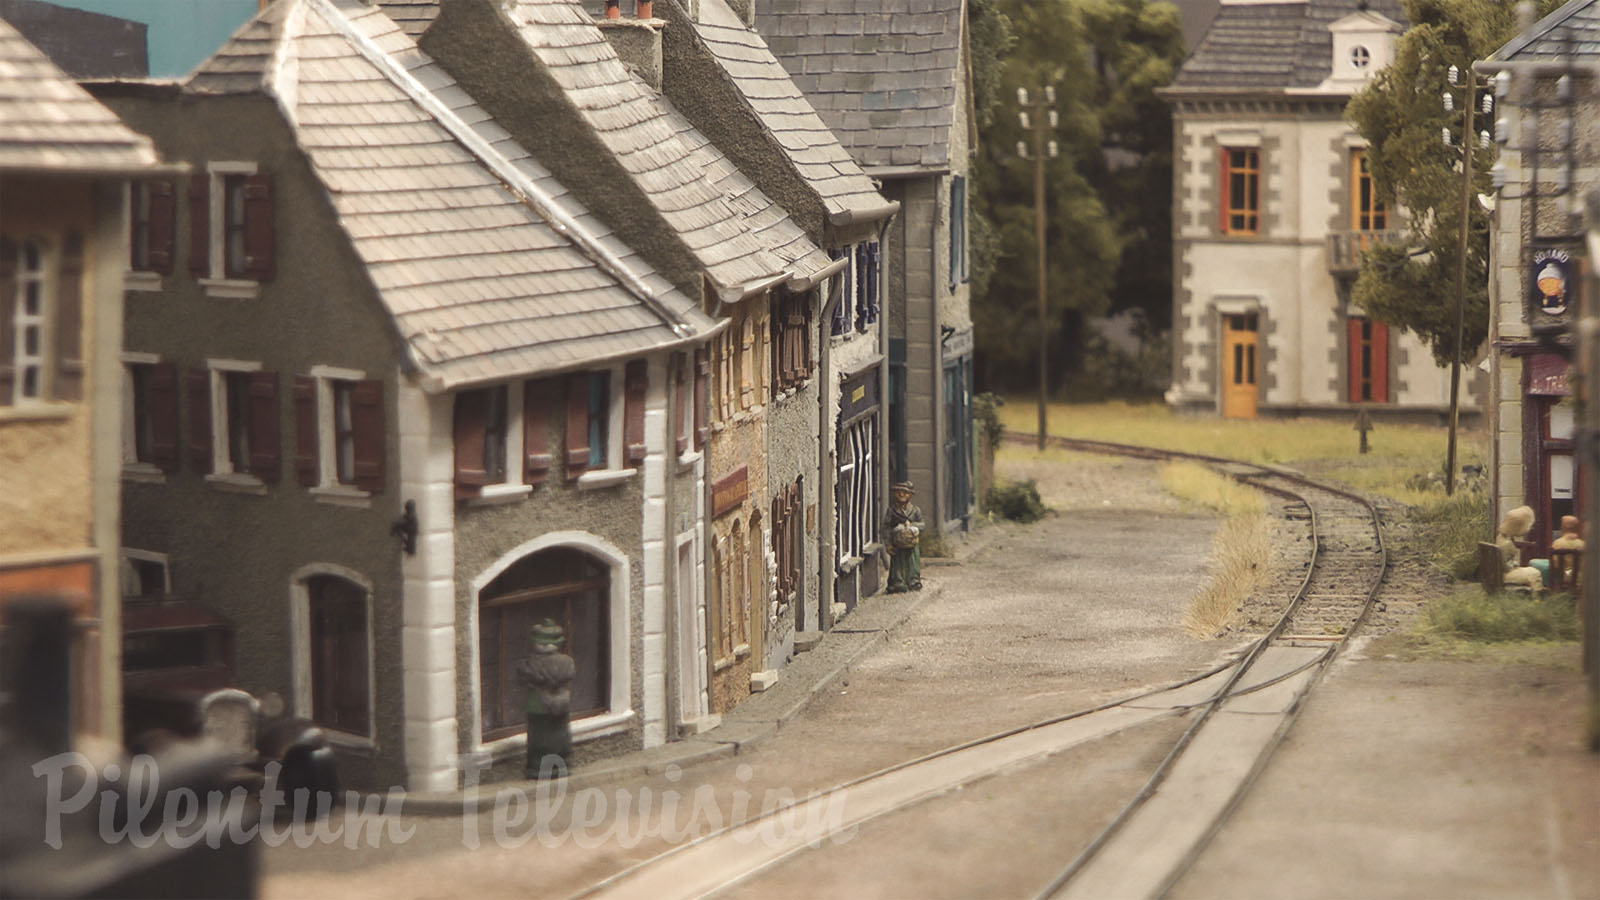 Model Railway - French Village Where Everyone Would Like To Live Due To The Steam Locomotive